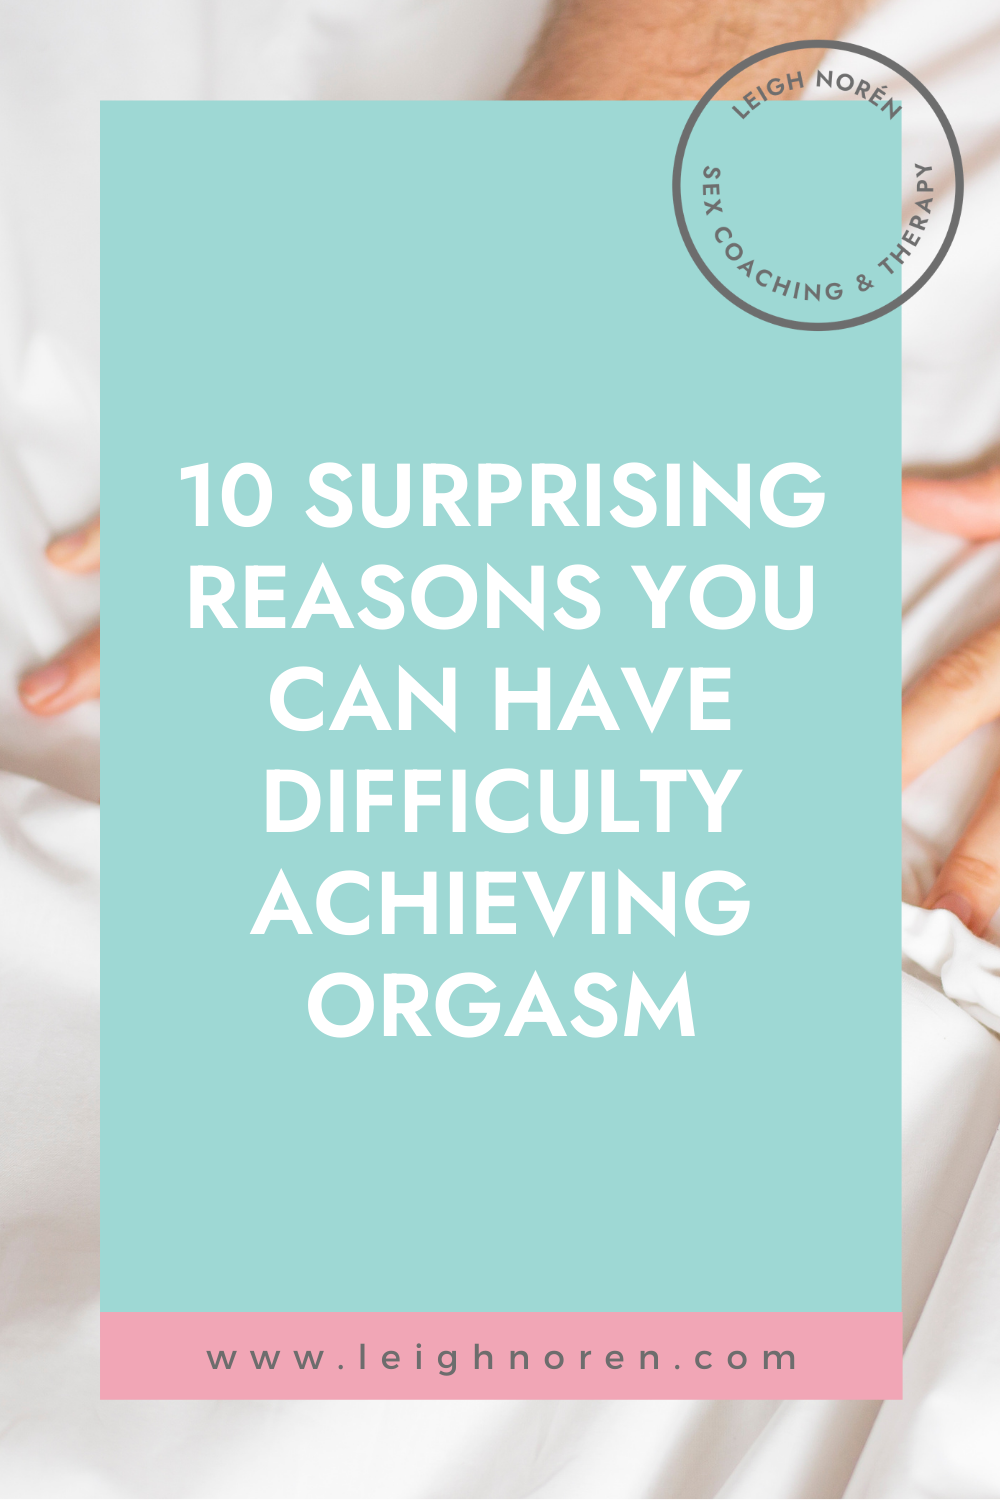 3 Easy Facts About The Female Climax, Orgasm, And Pleasure - Everyday Health Shown